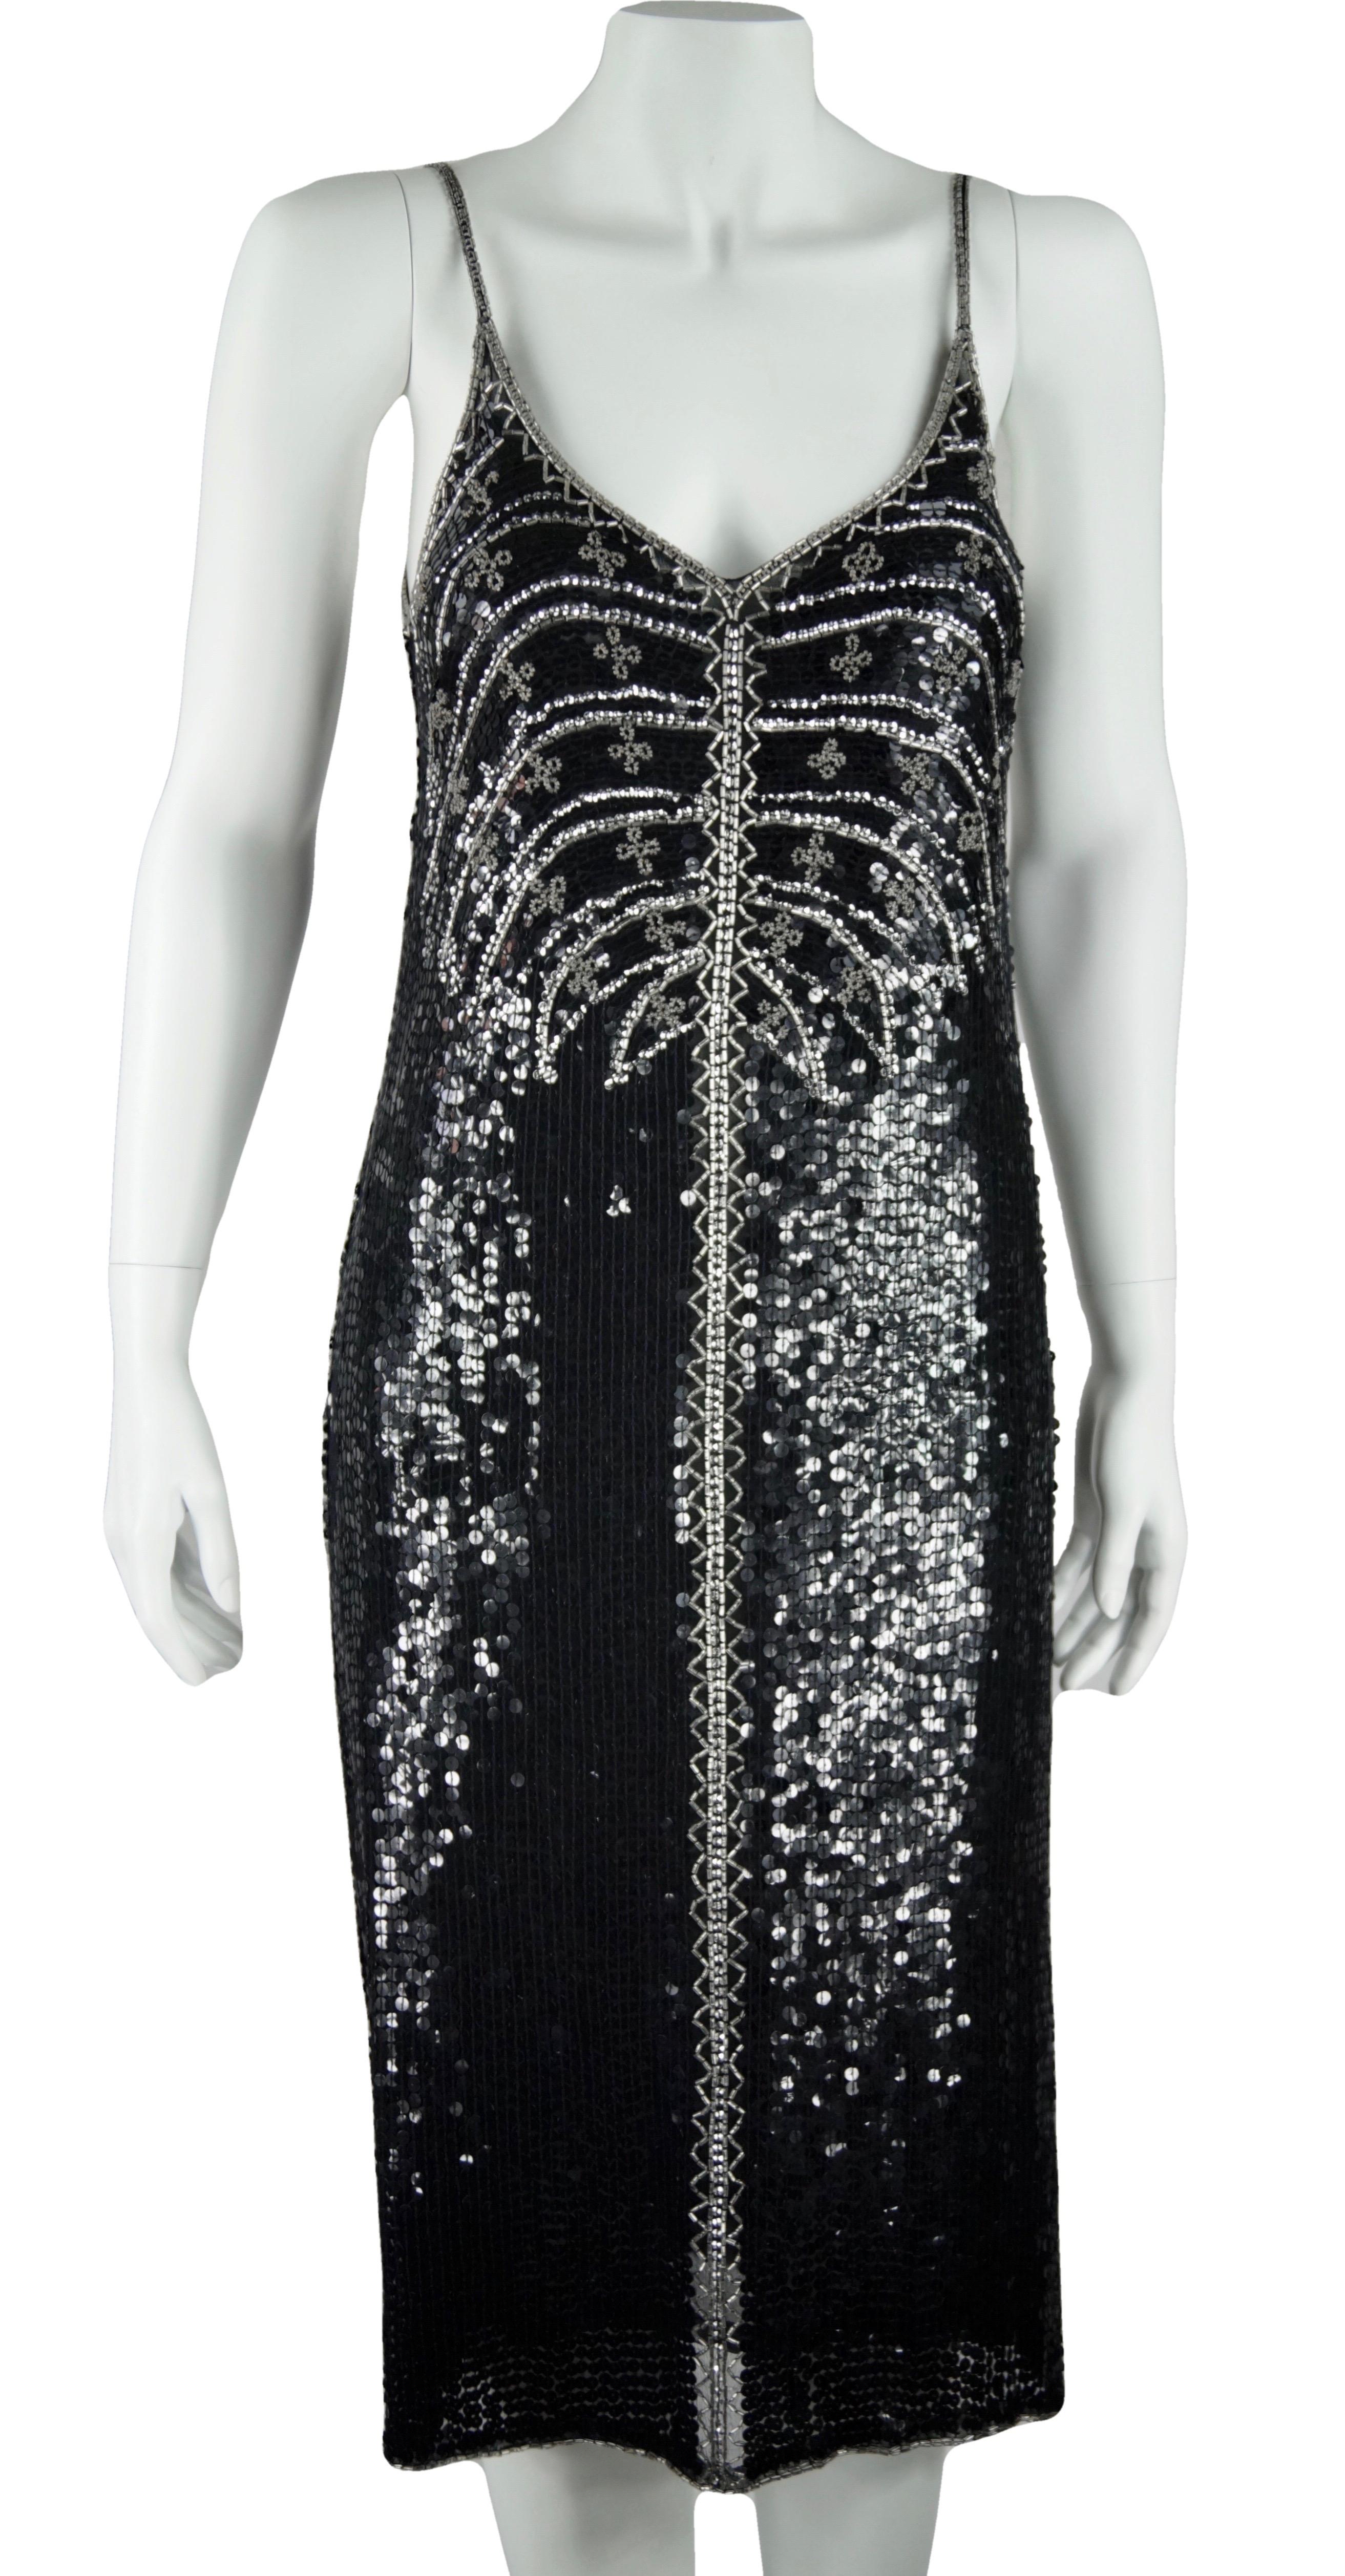 Vintage black and silver sequins and pearls dress by  italian Carla Carini designer in 80s.
Sliding sheath dress with thin straps.
Embroidered with black sequins and silver beads on a black silk base.
Size M
Made in Italy
Flat measures:
Length cm.